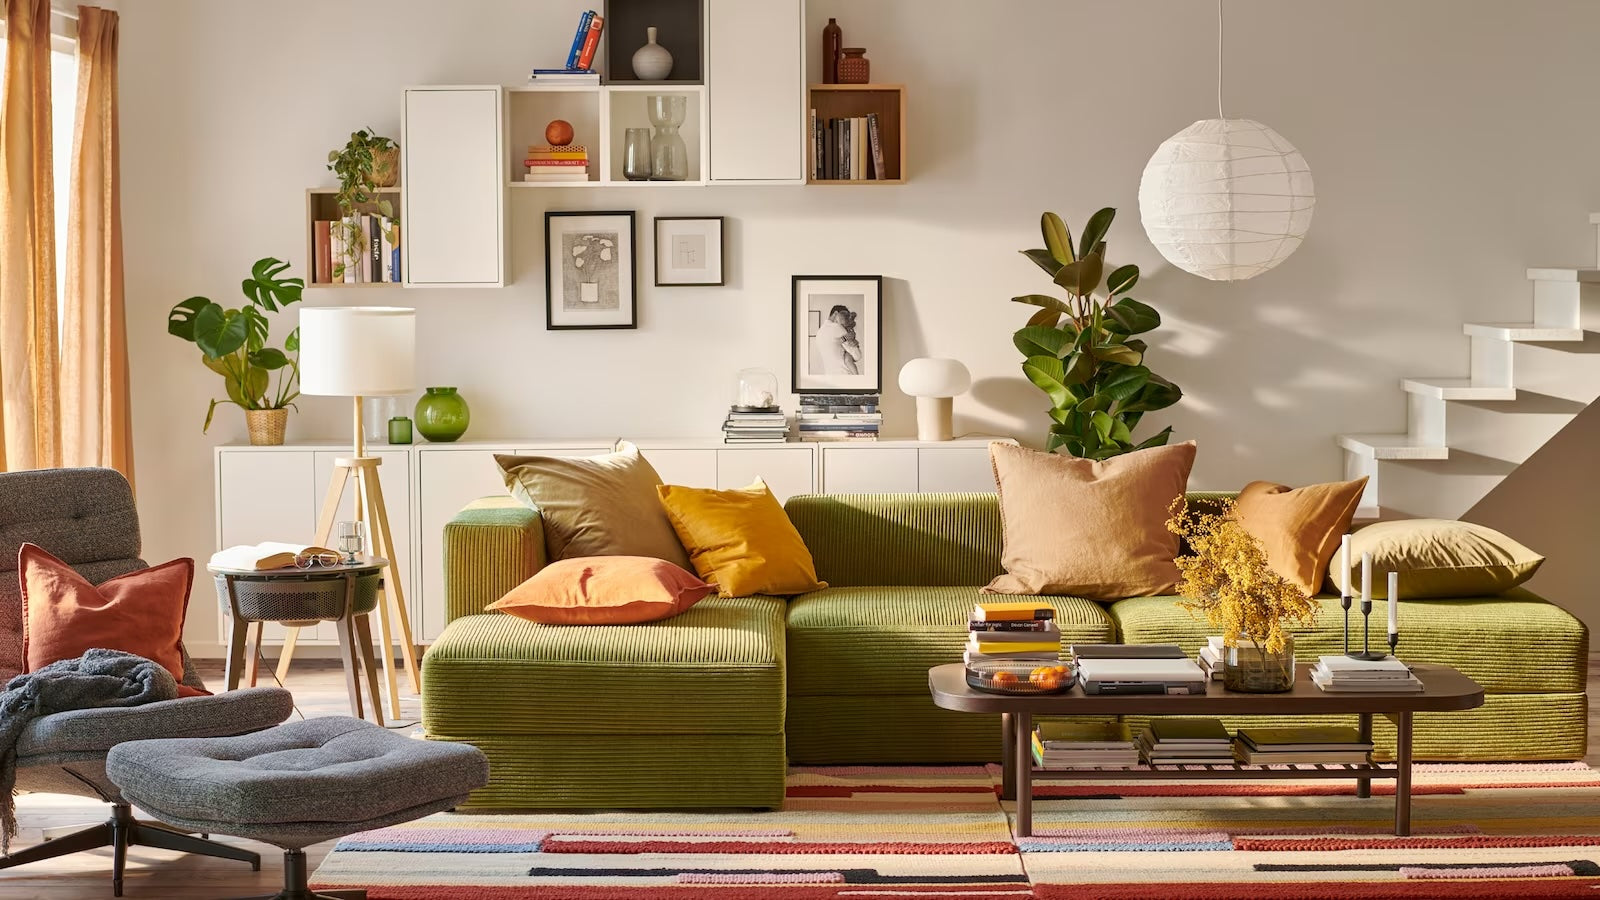 A cozy living room featuring a green sofa with an assortment of colorful cushions. A modern lounge chair and footrest sit nearby. The room is adorned with potted plants, a bookshelf, framed pictures, a white pendant light, and a multicolored striped rug.